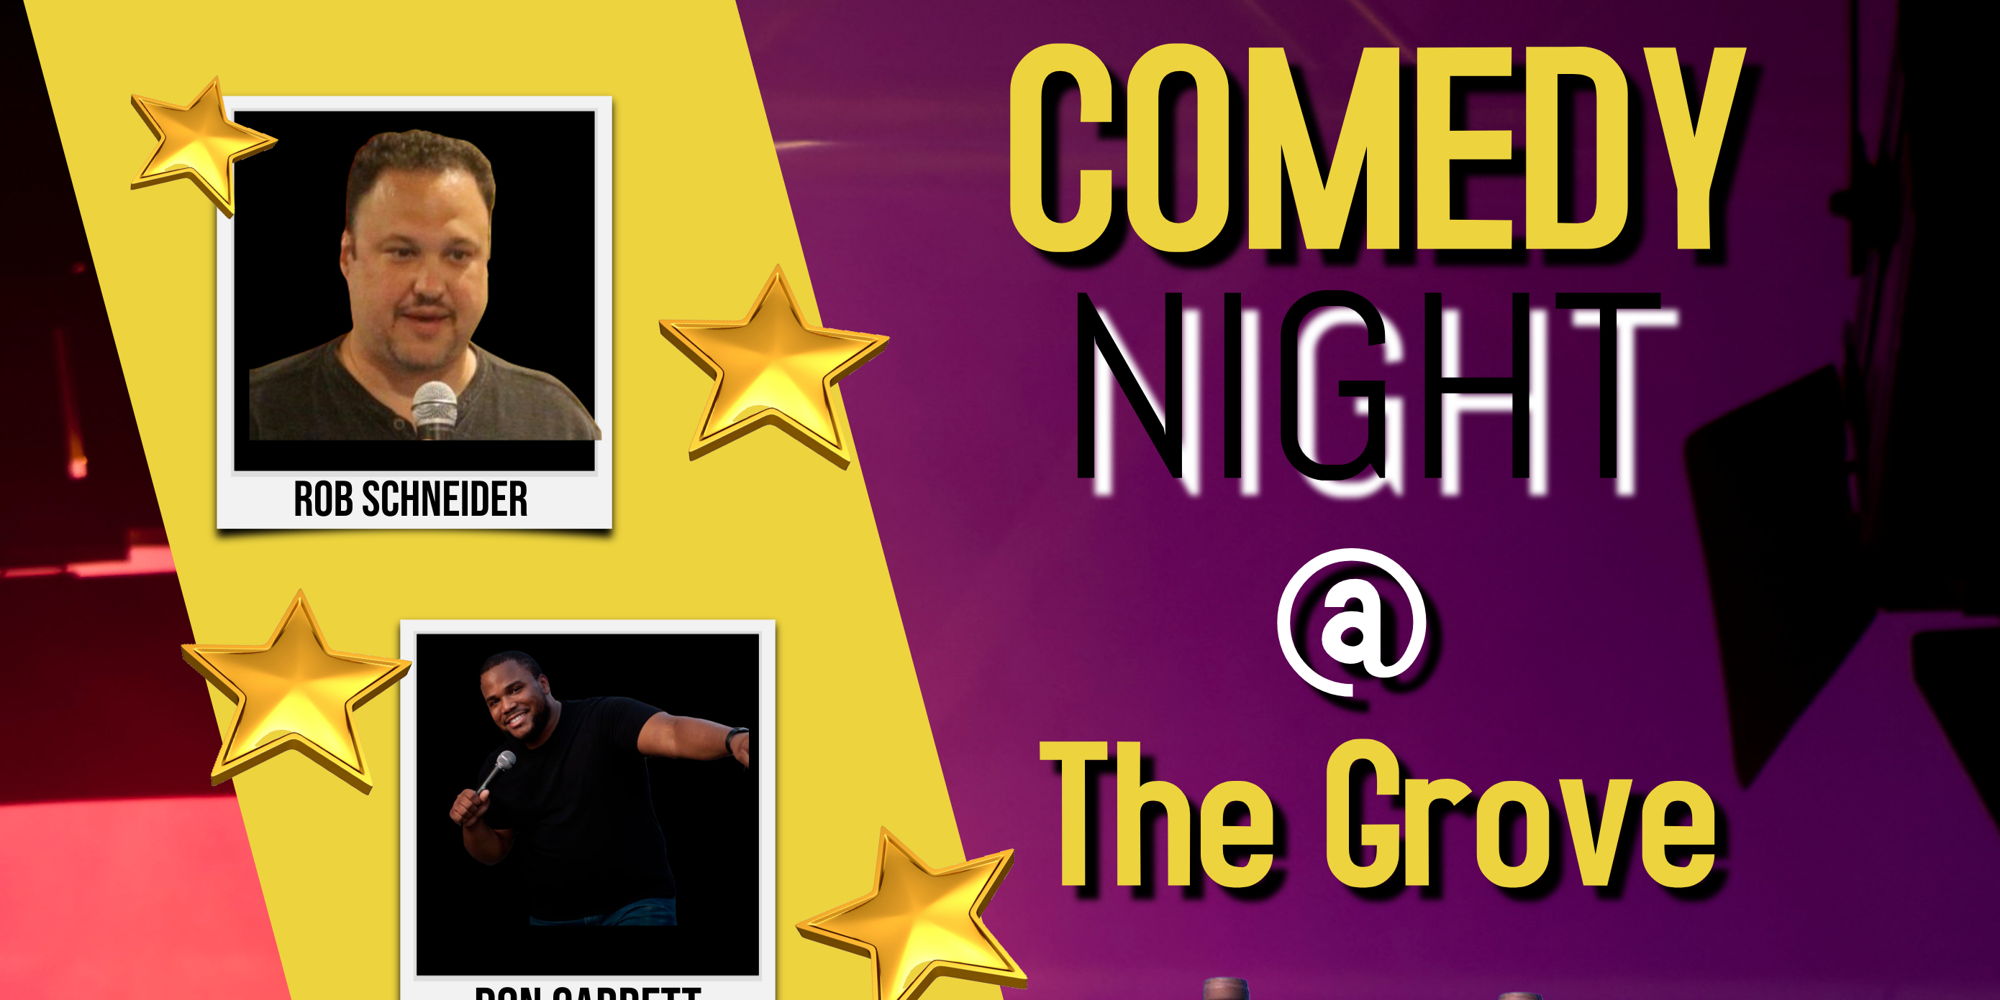 Comedy Night @ The Grove promotional image